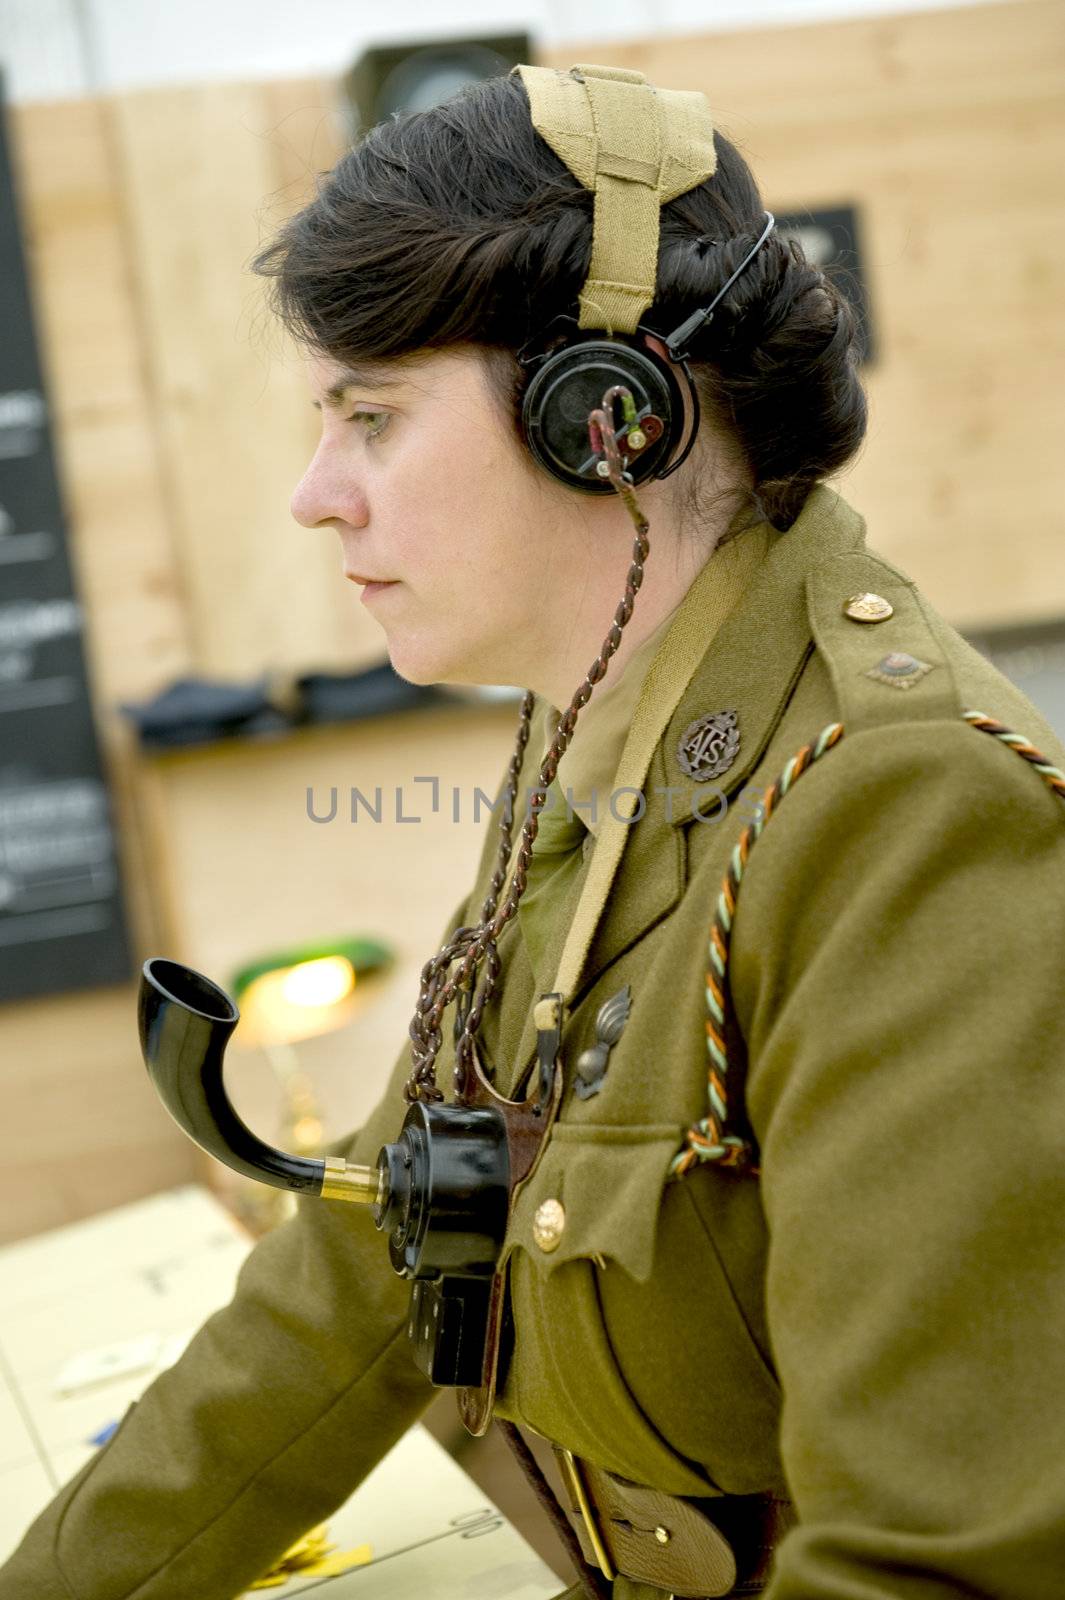 The woman in clothes English military a communications service provider of times of 40th years, taken on September 2011 on Goodwood revial in UK